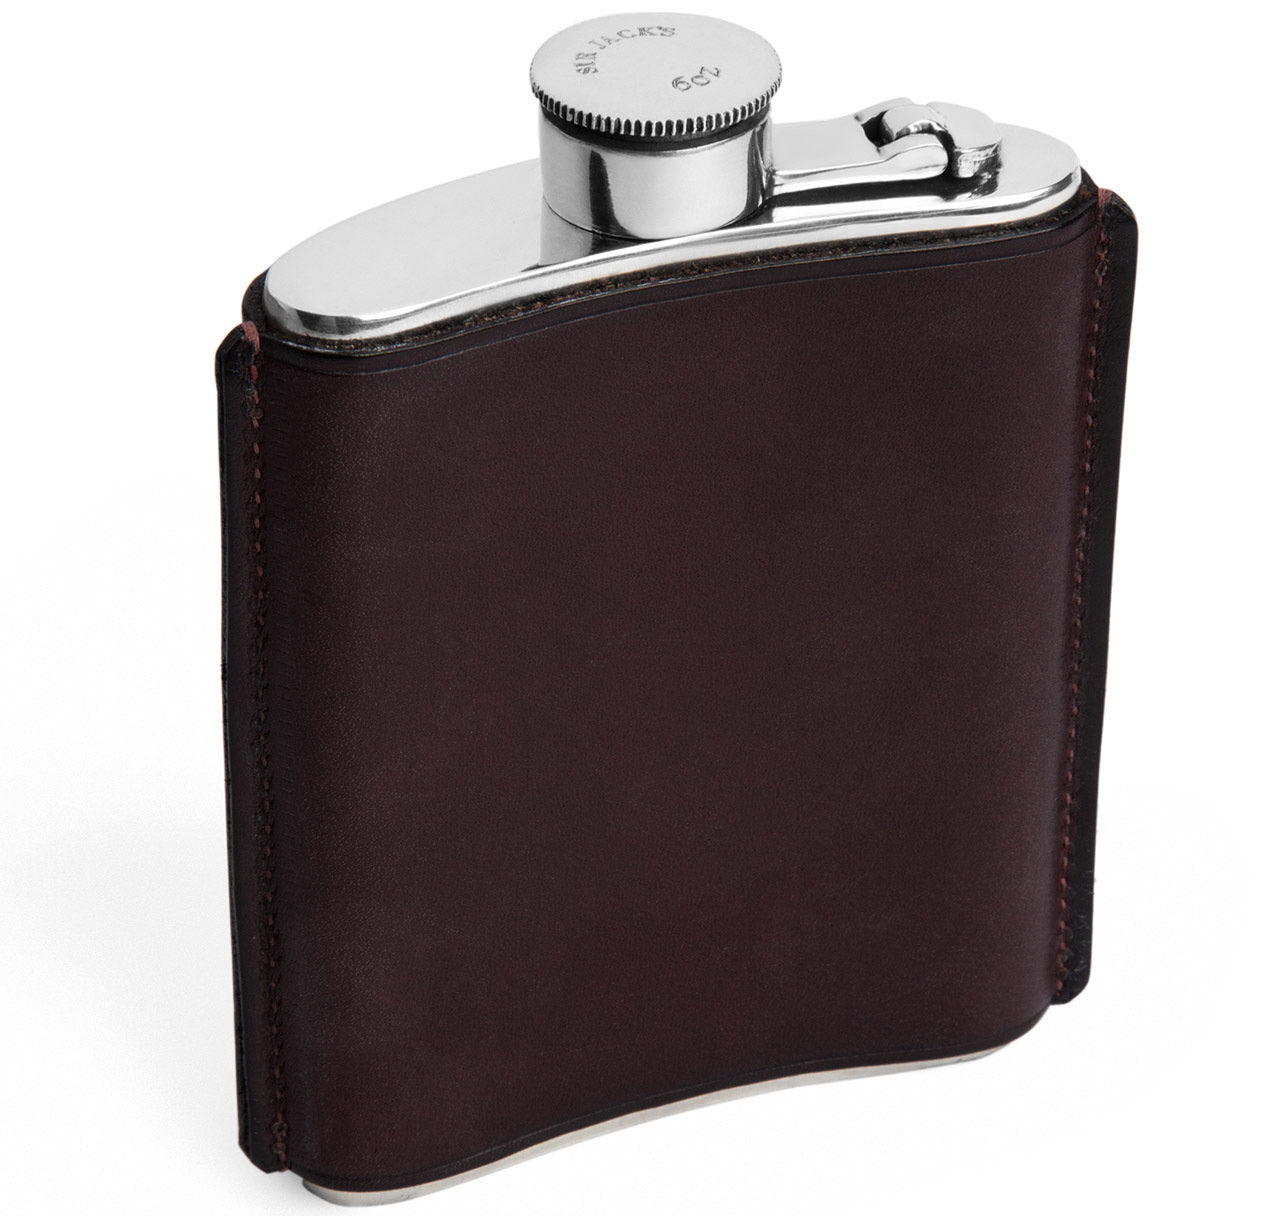 6oz Brown Leather Kidney Captive Top Flask